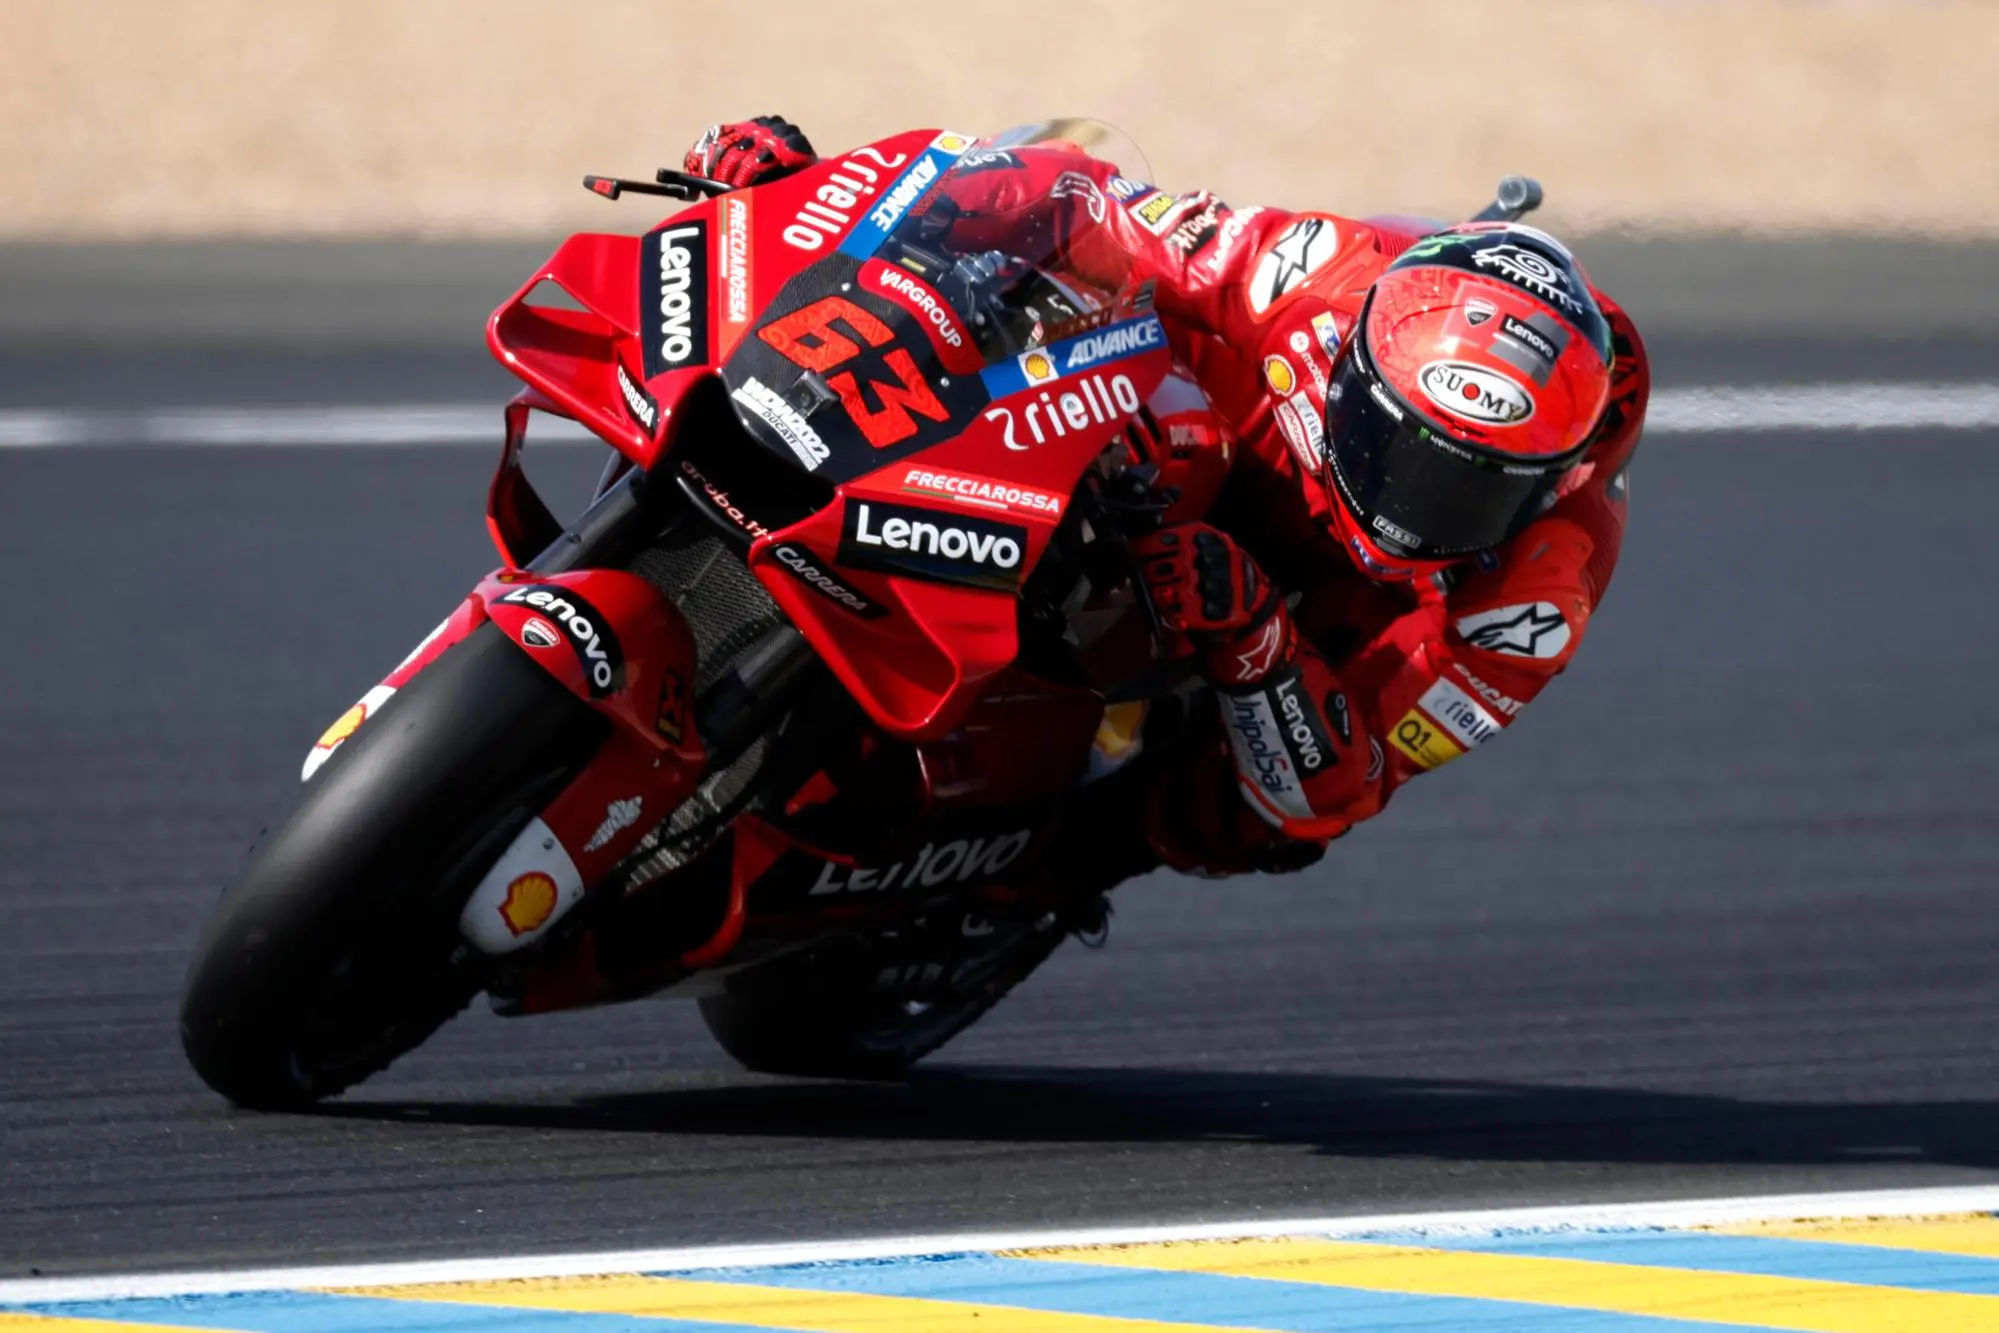 epa09946214 Italian MotoGP rider Francesco Bagnaia of Ducati Lenovo Team in action during the third free practice session for the French Motorcycling Grand Prix in Le Mans, France, 14 May 2022. EPA/YOAN VALAT